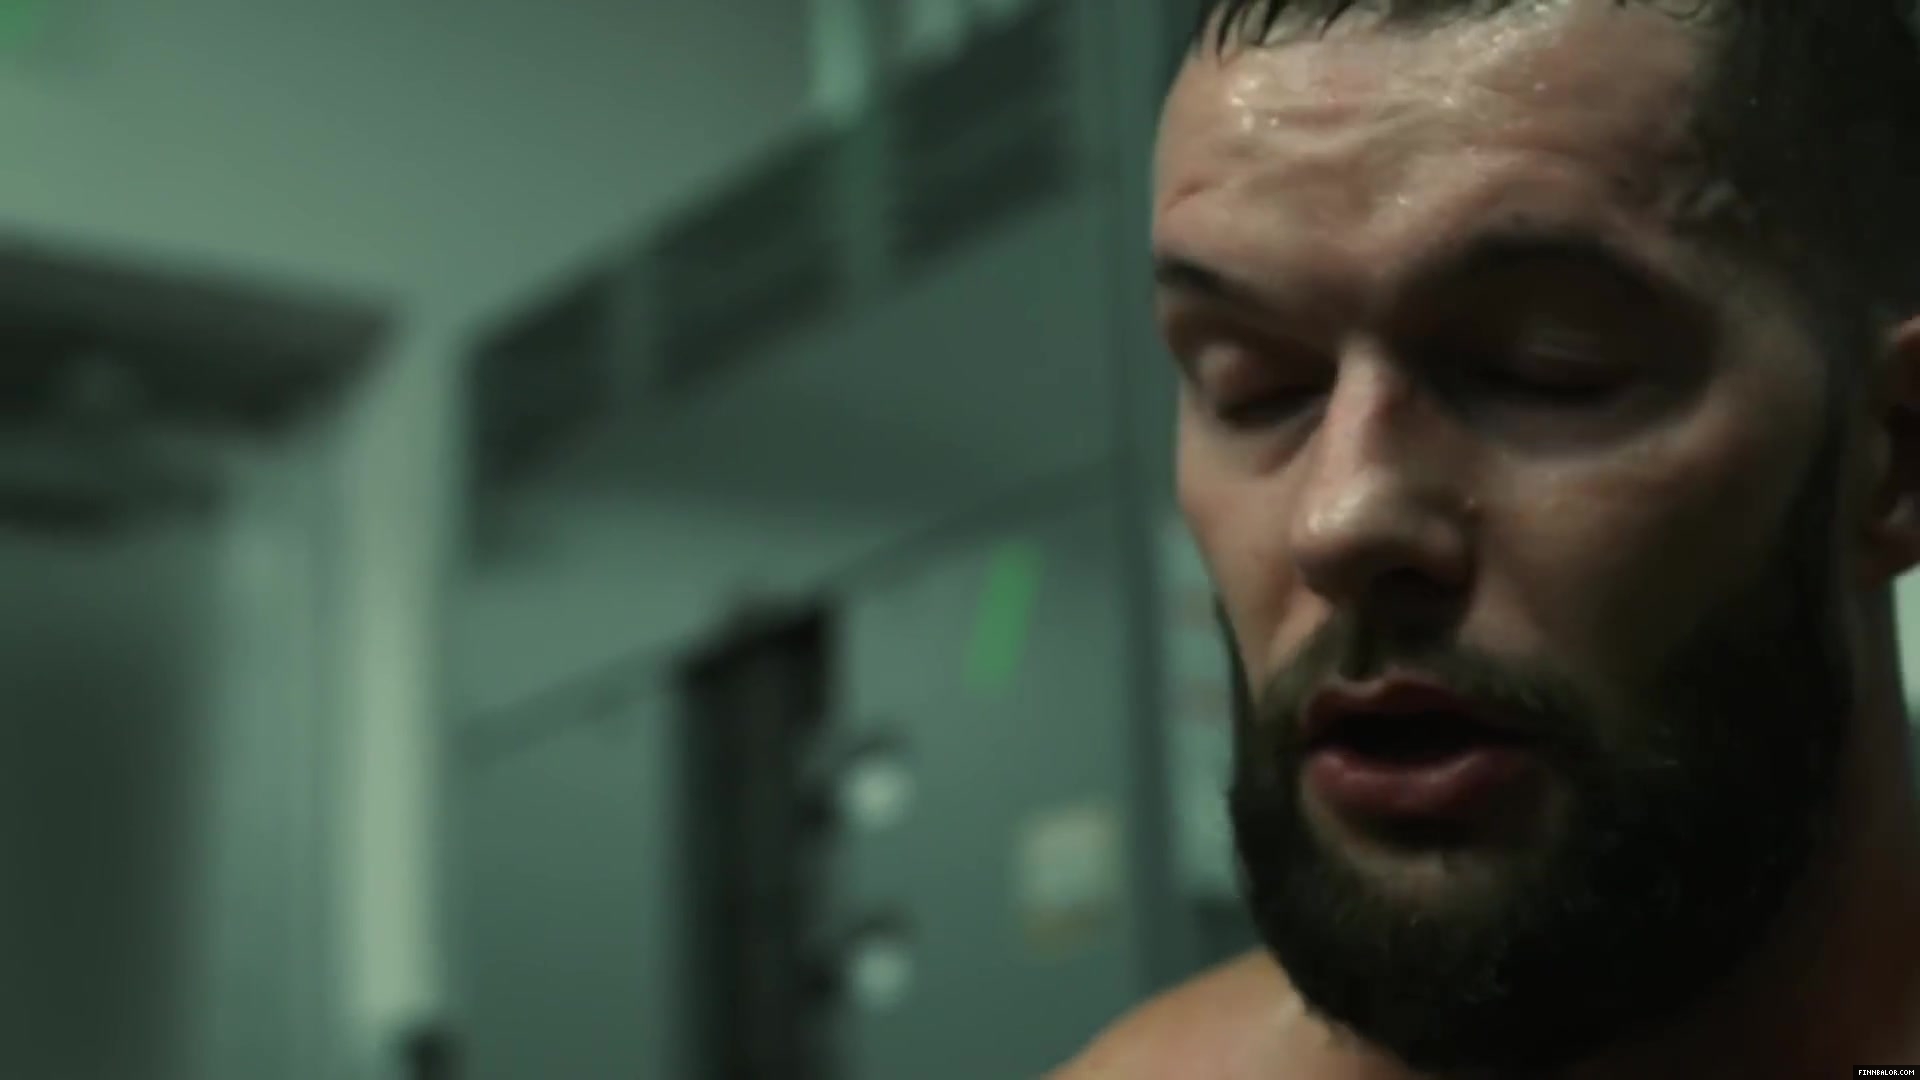 Finn_Balor___The_Rising_of_the_Prince_in_NXT_308.jpg